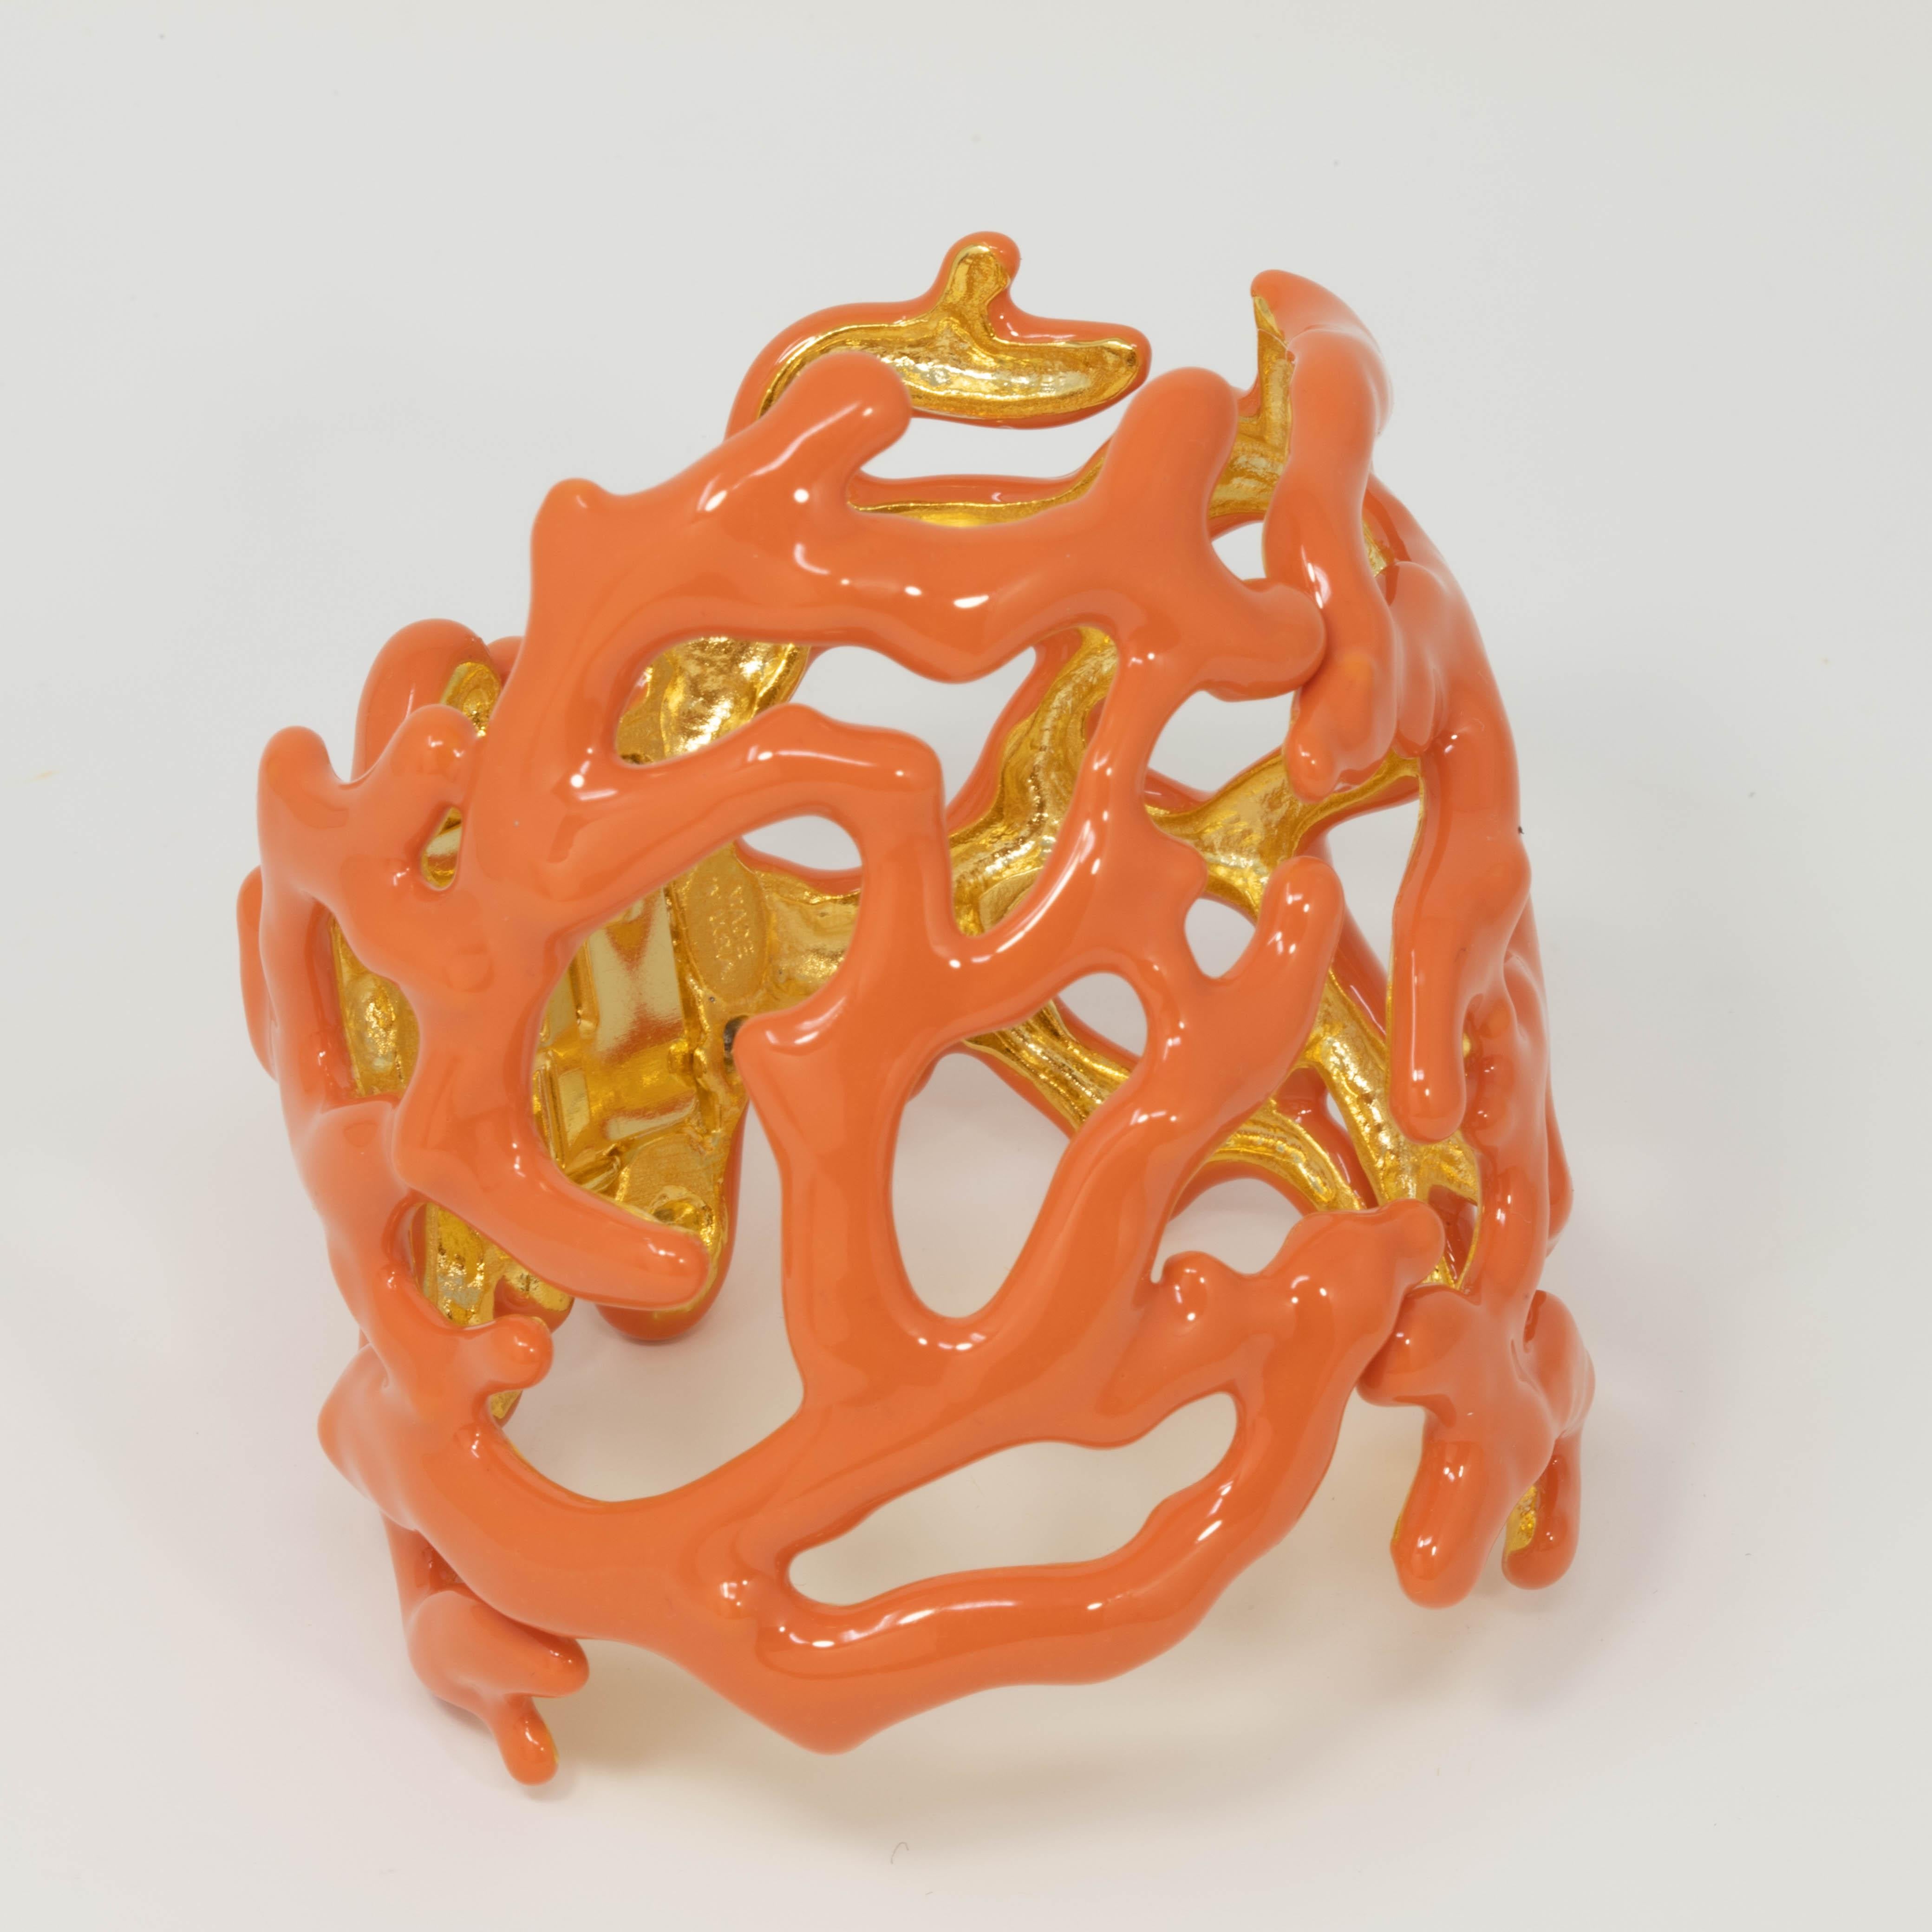 More beautiful than the oceans! This nautical Kenneth Jay Lane cuff bracelet features coral branches painted in a mellow-orange enamel. 

Set on gold plated metal setting. Hinged bangle.

Hallmarks: Kenneth Lane, Made in USA

Inner circumference: